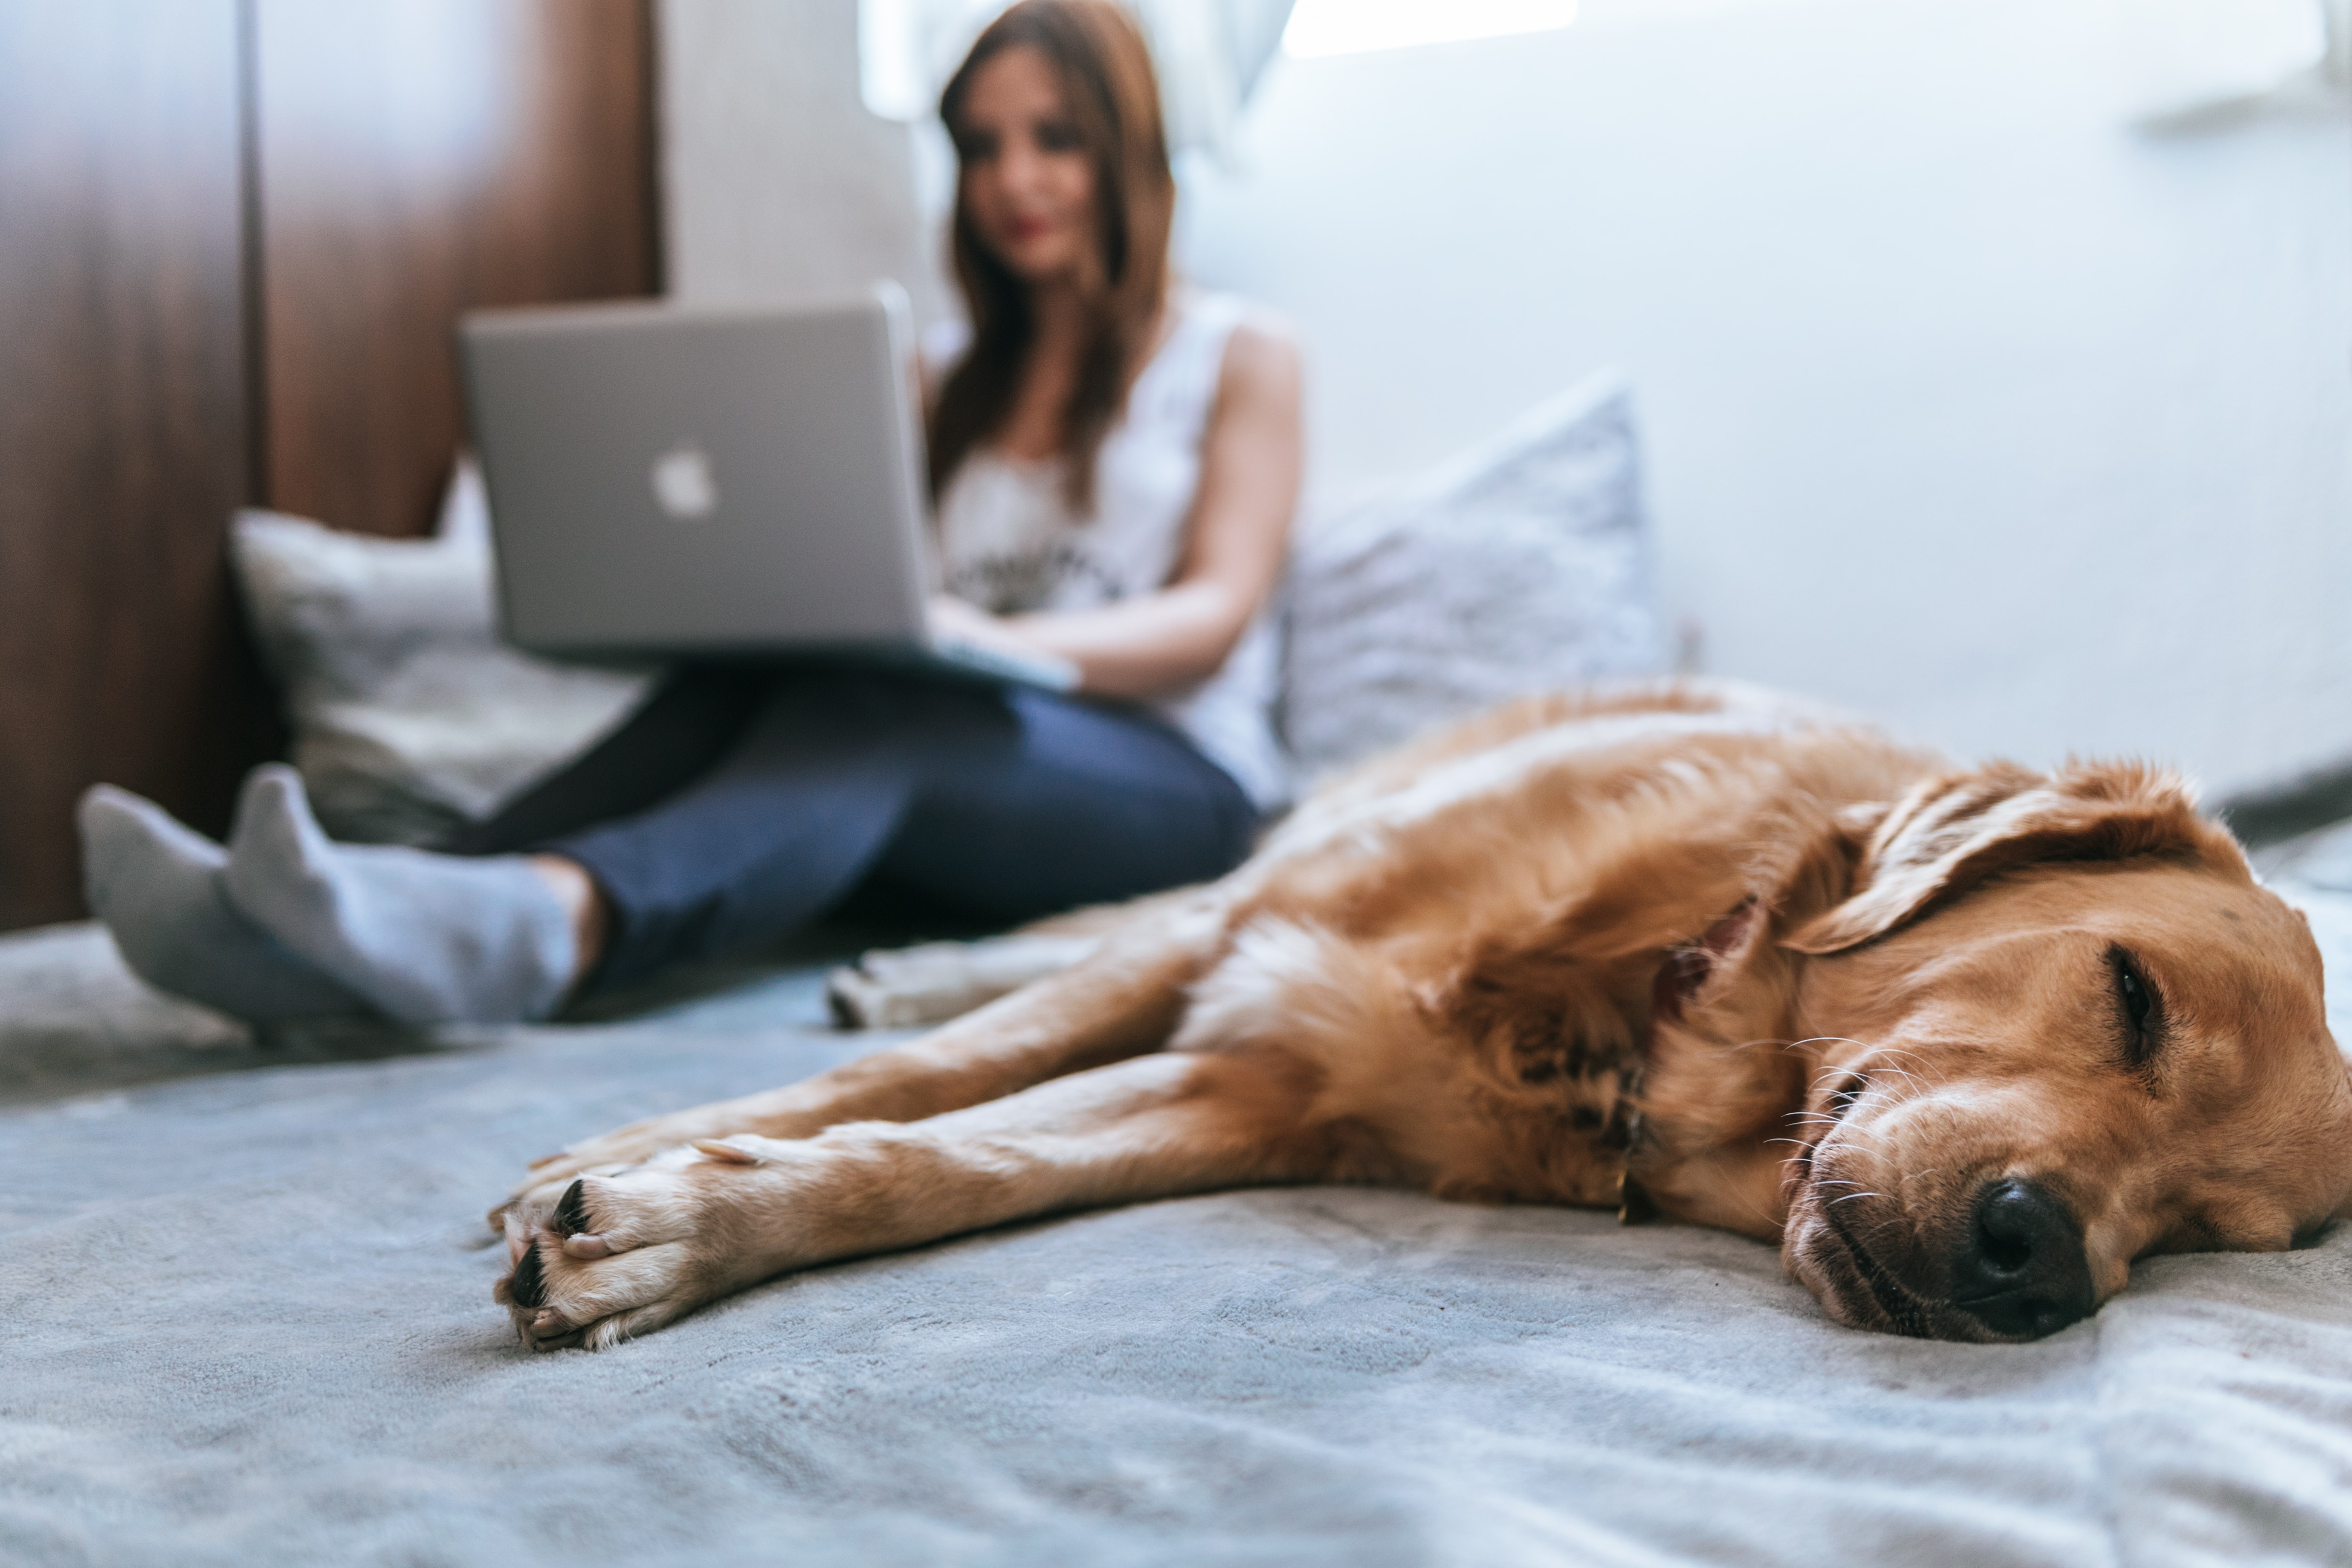 Woman on her bed using a laptop while her pet dog sleeps